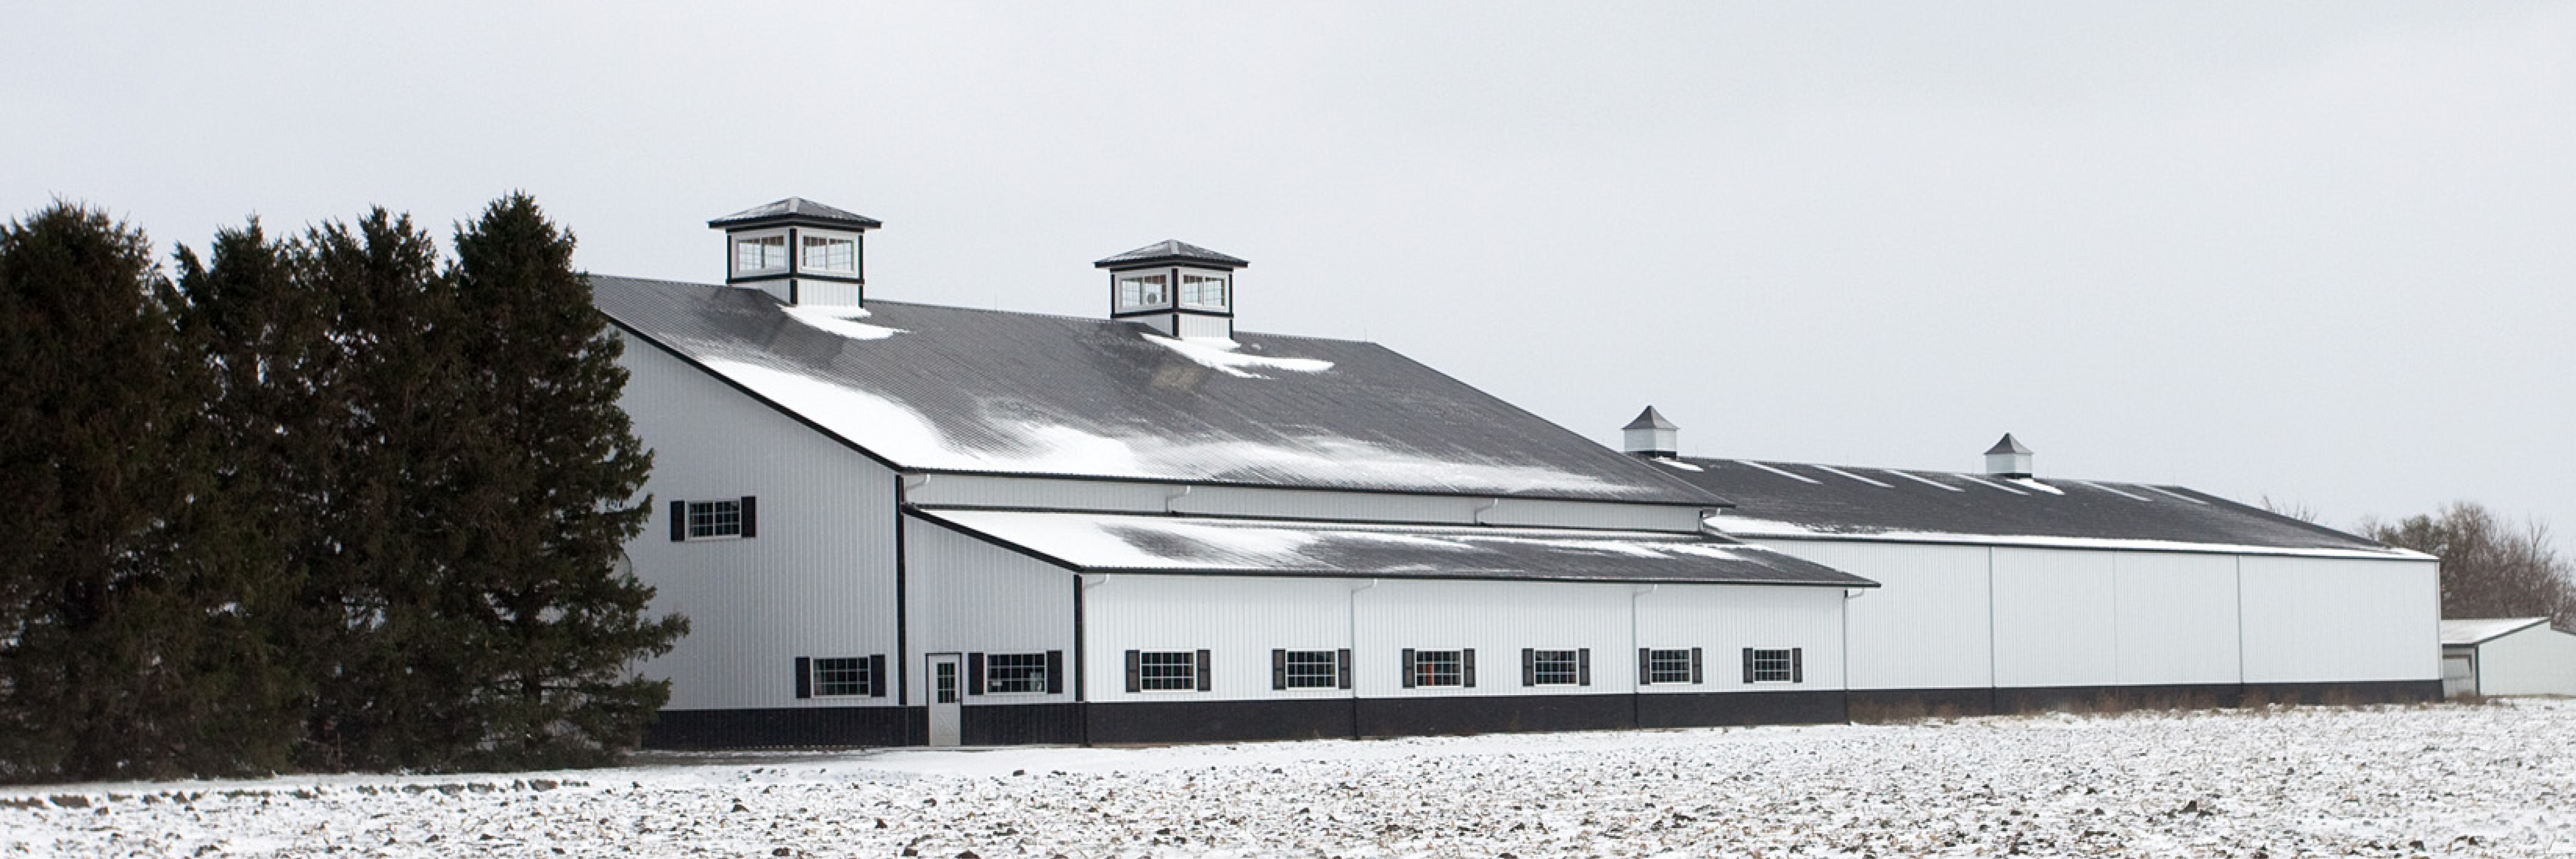 Can You Build a Pole Barn in The Winter?